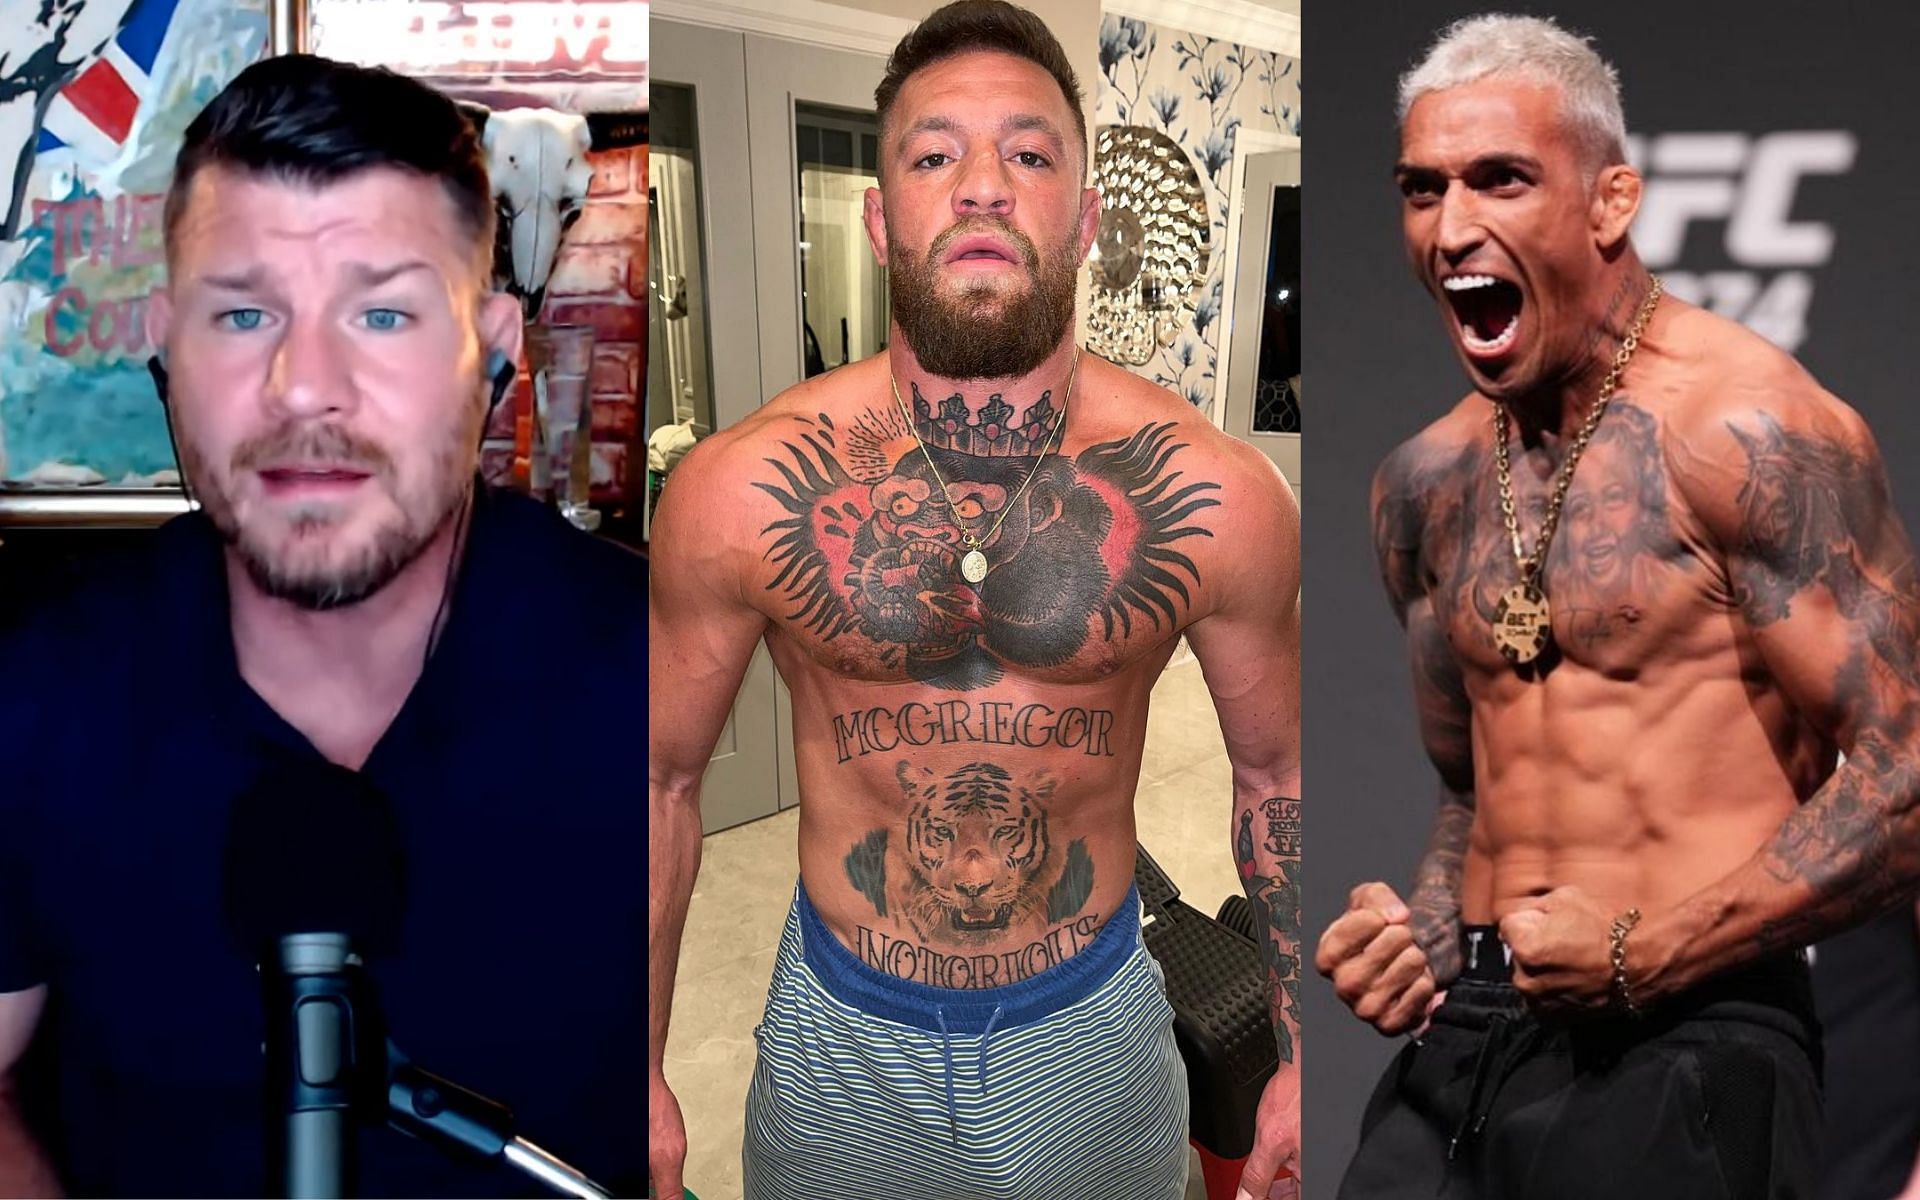 Michael Bisping (left), Conor McGregor (middle), Charles Oliveira (right) [Image courtesy: Michael Bisping YouTube channel, @thenotoriousmma and @charlesdobronxs via Instagram]